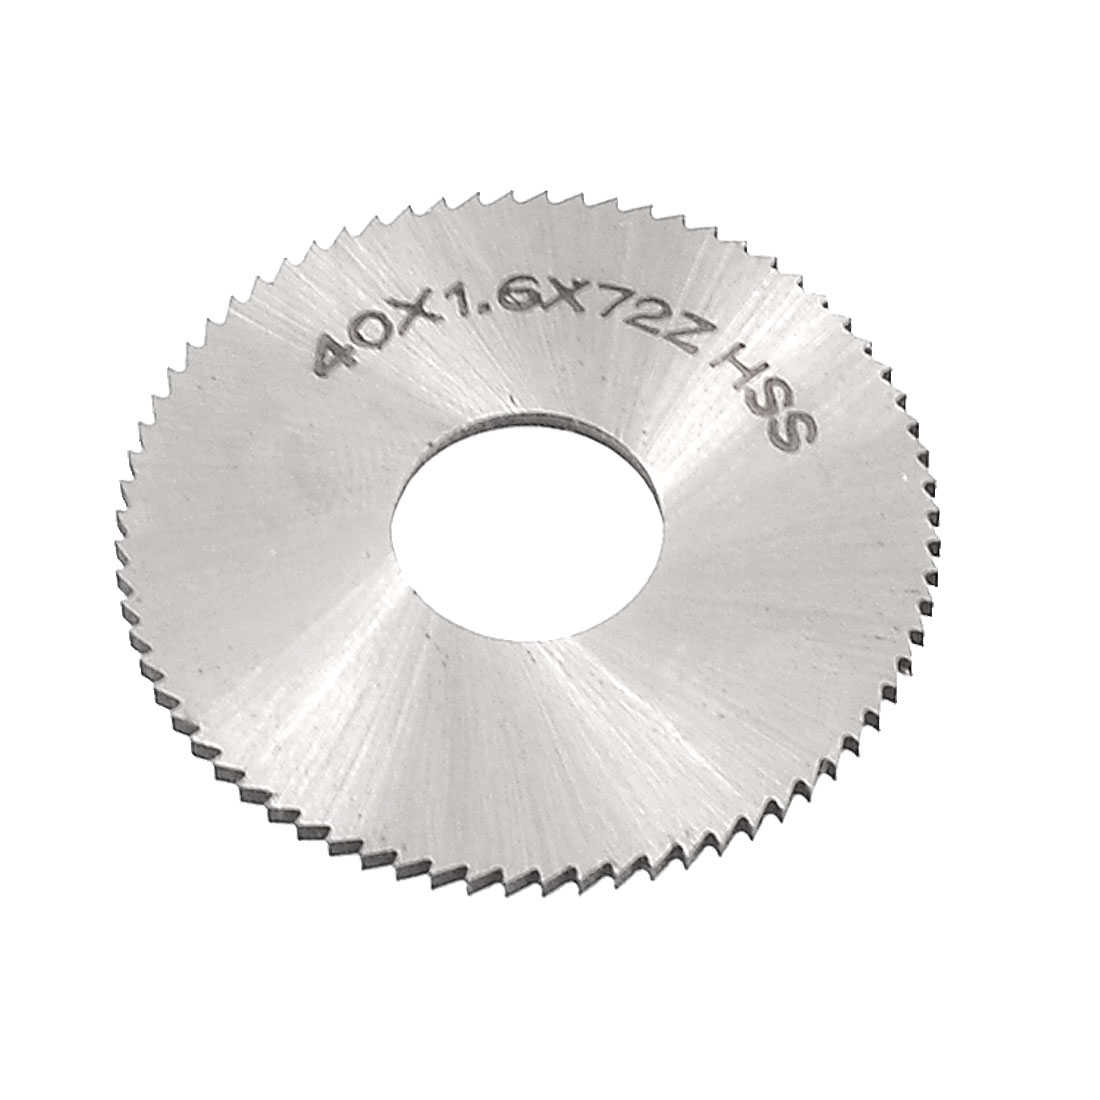 Unique Bargains 40mm OD 1.6mm Thickness 72T HSS Circle Slitting Saw